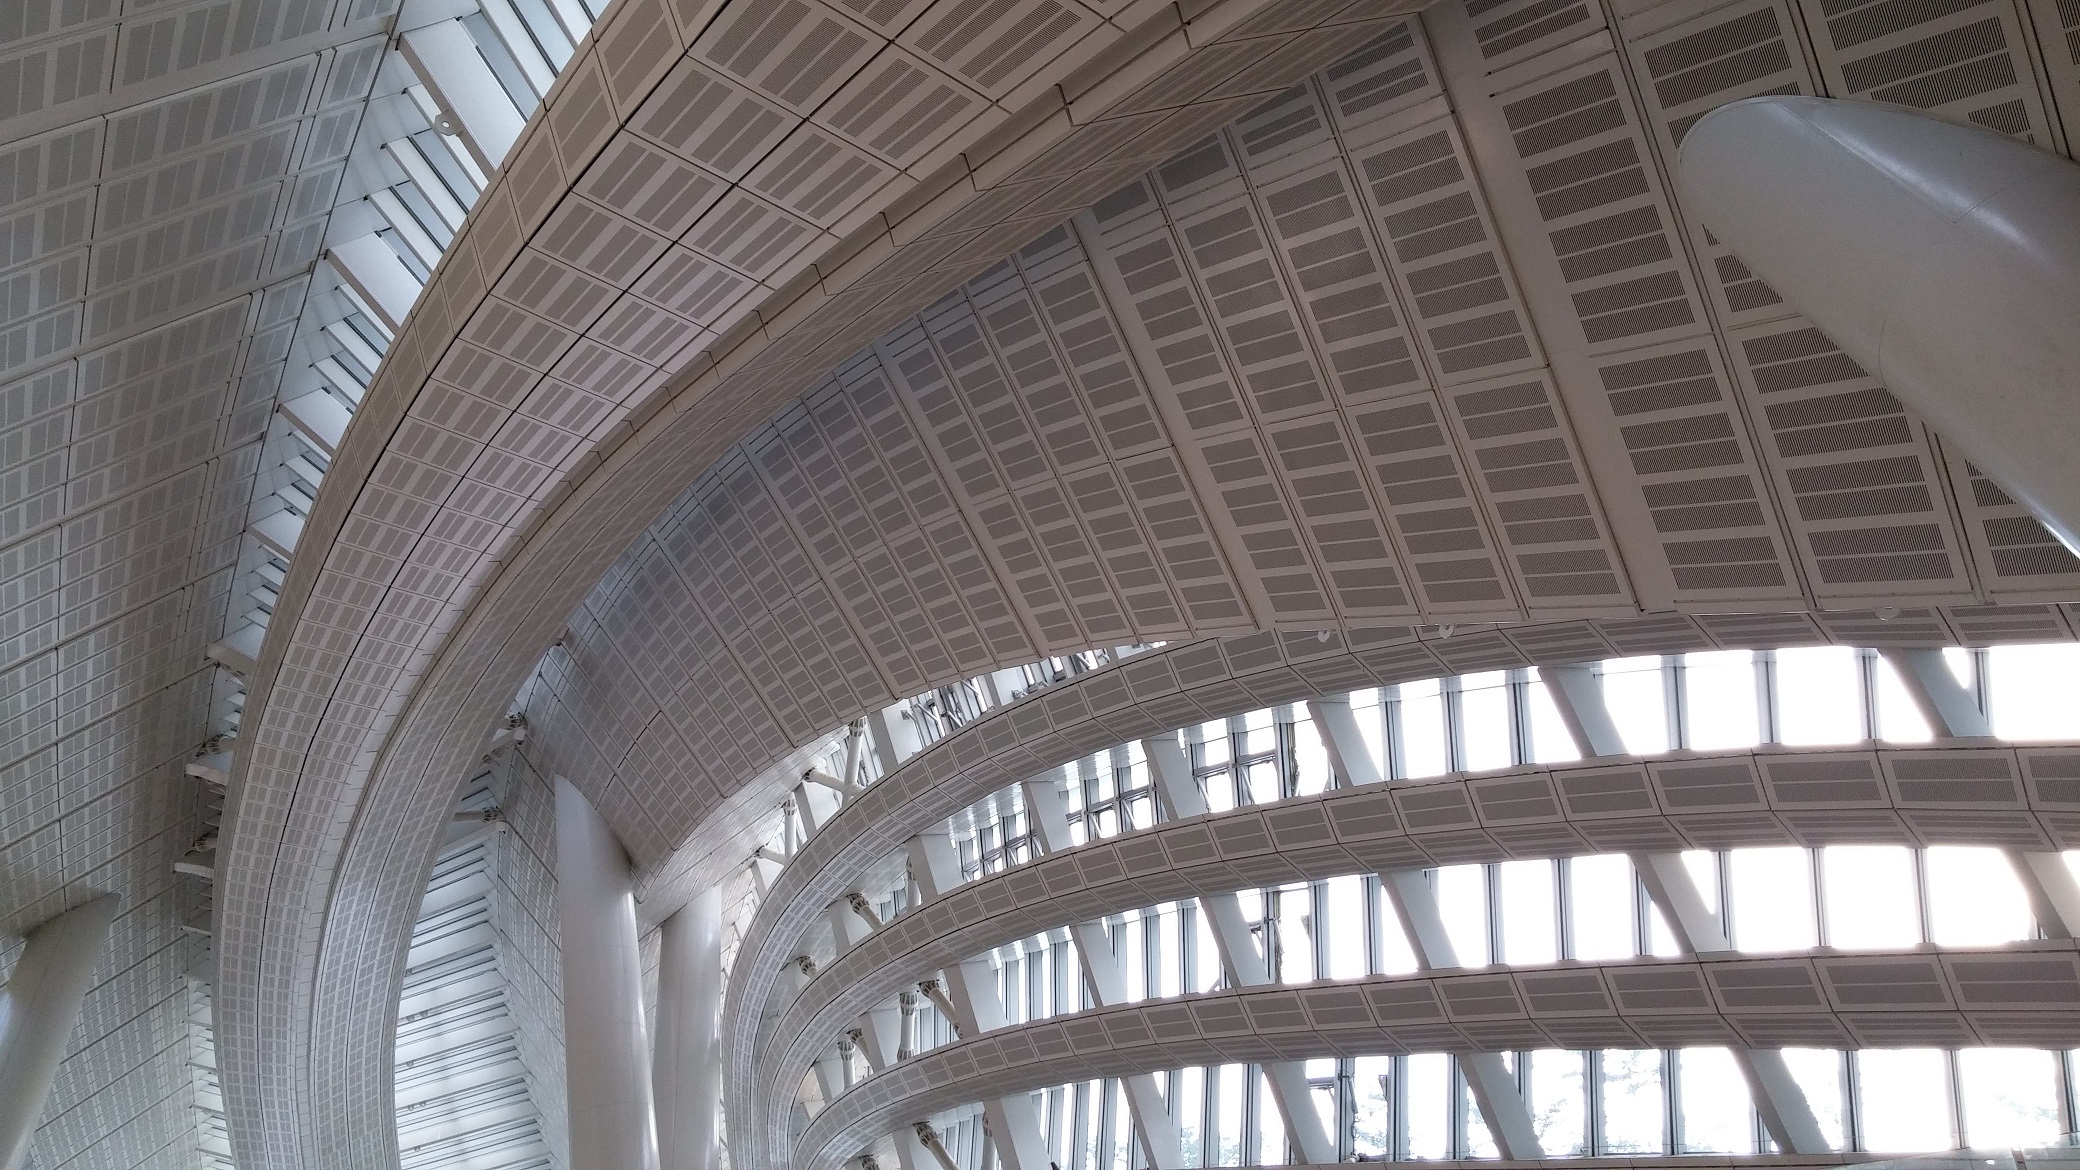 The curved ceiling and glass wall of West Kowloon Station